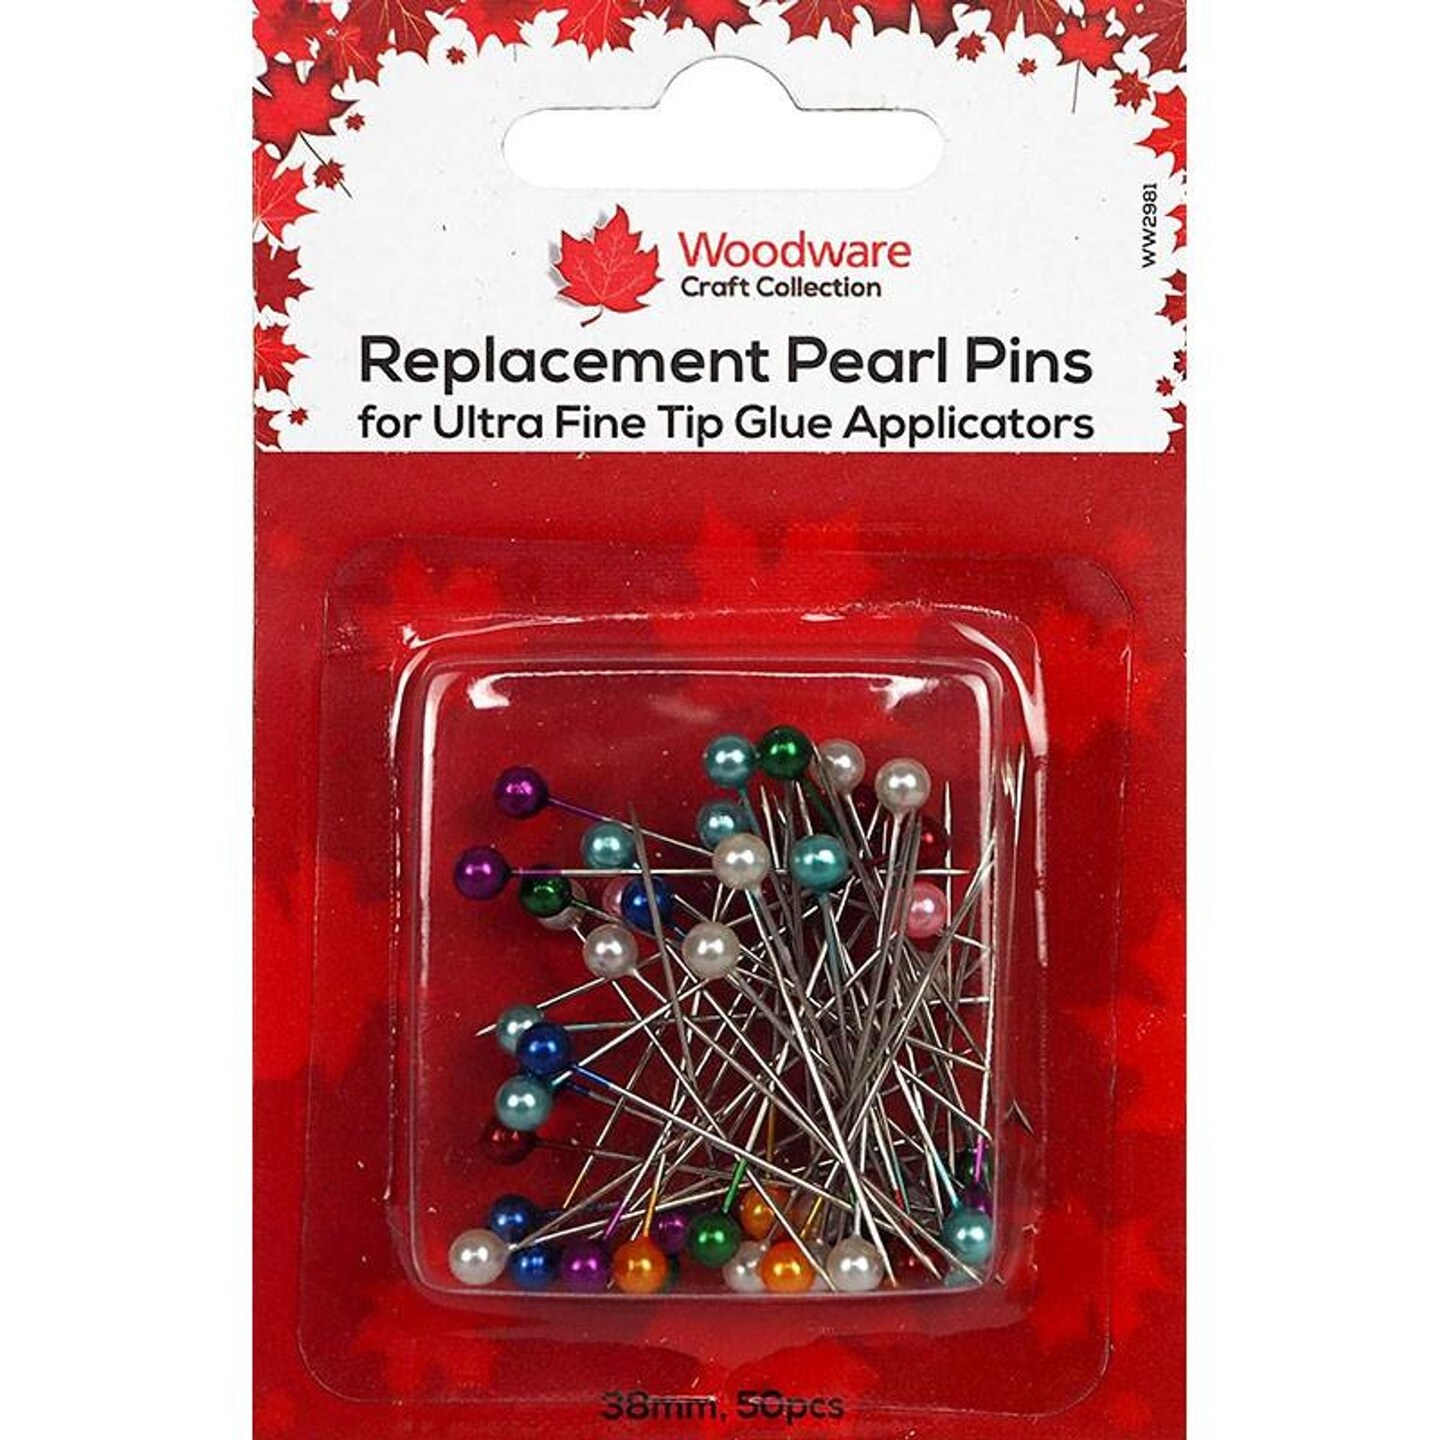 Woodware Craft Collection Woodware Stainless Steel Pearl Pins